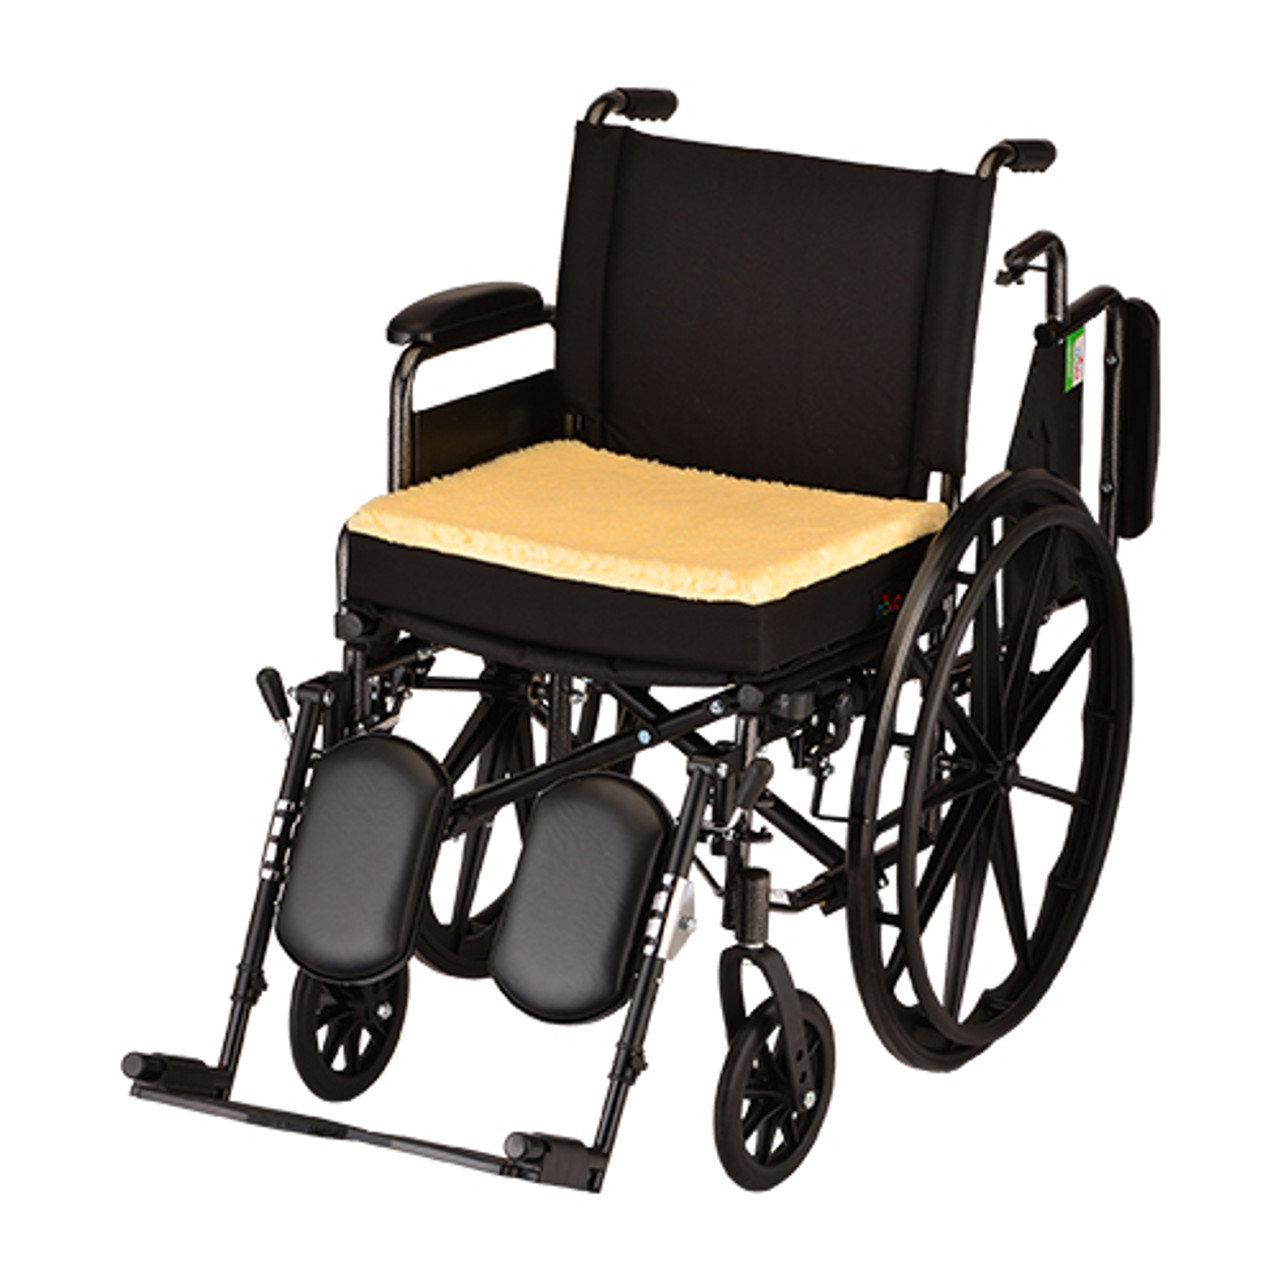 Convoluted Seat/Back Wheelchair Cushion With Fleece Cover - Healthquest,  Inc.